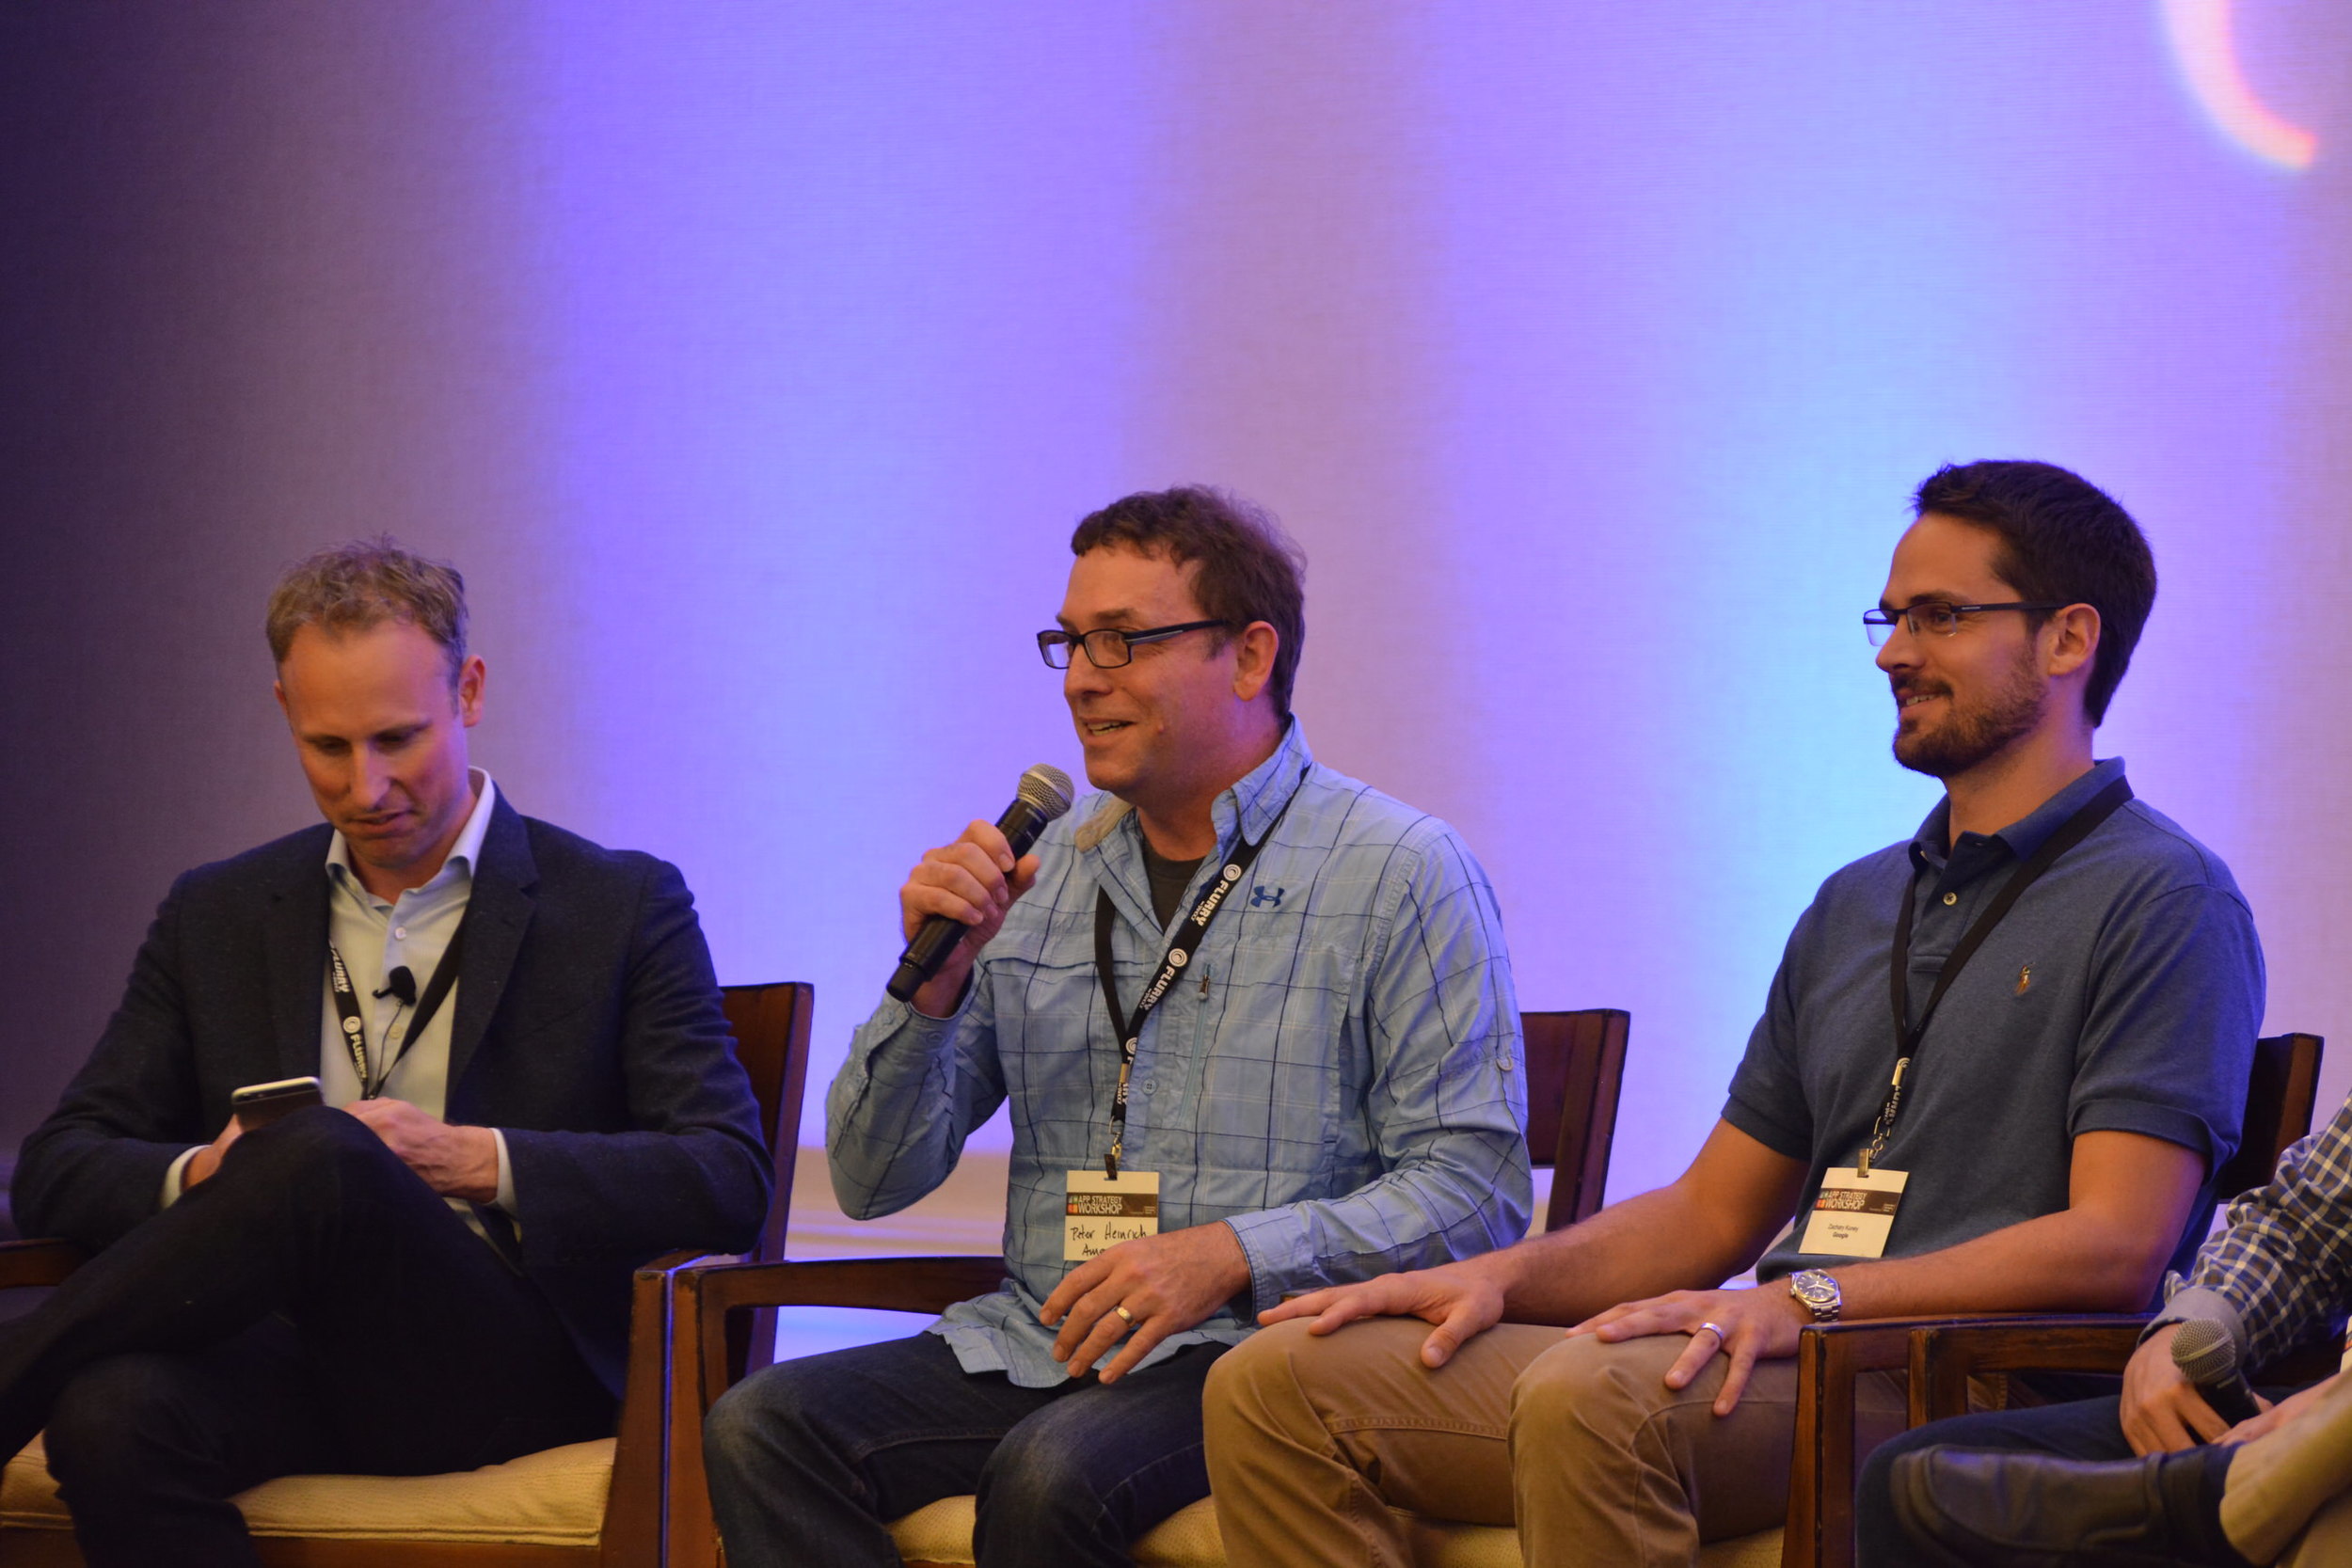 Our next panel was moderated by Martin Price (Chocolate by Vdopia), and it featured Zachary Kuney (Google), Adam Rockmore (Fandango), Peter Heinrich (Amazon Appstore), and Rafael Vivas (AppLovin).